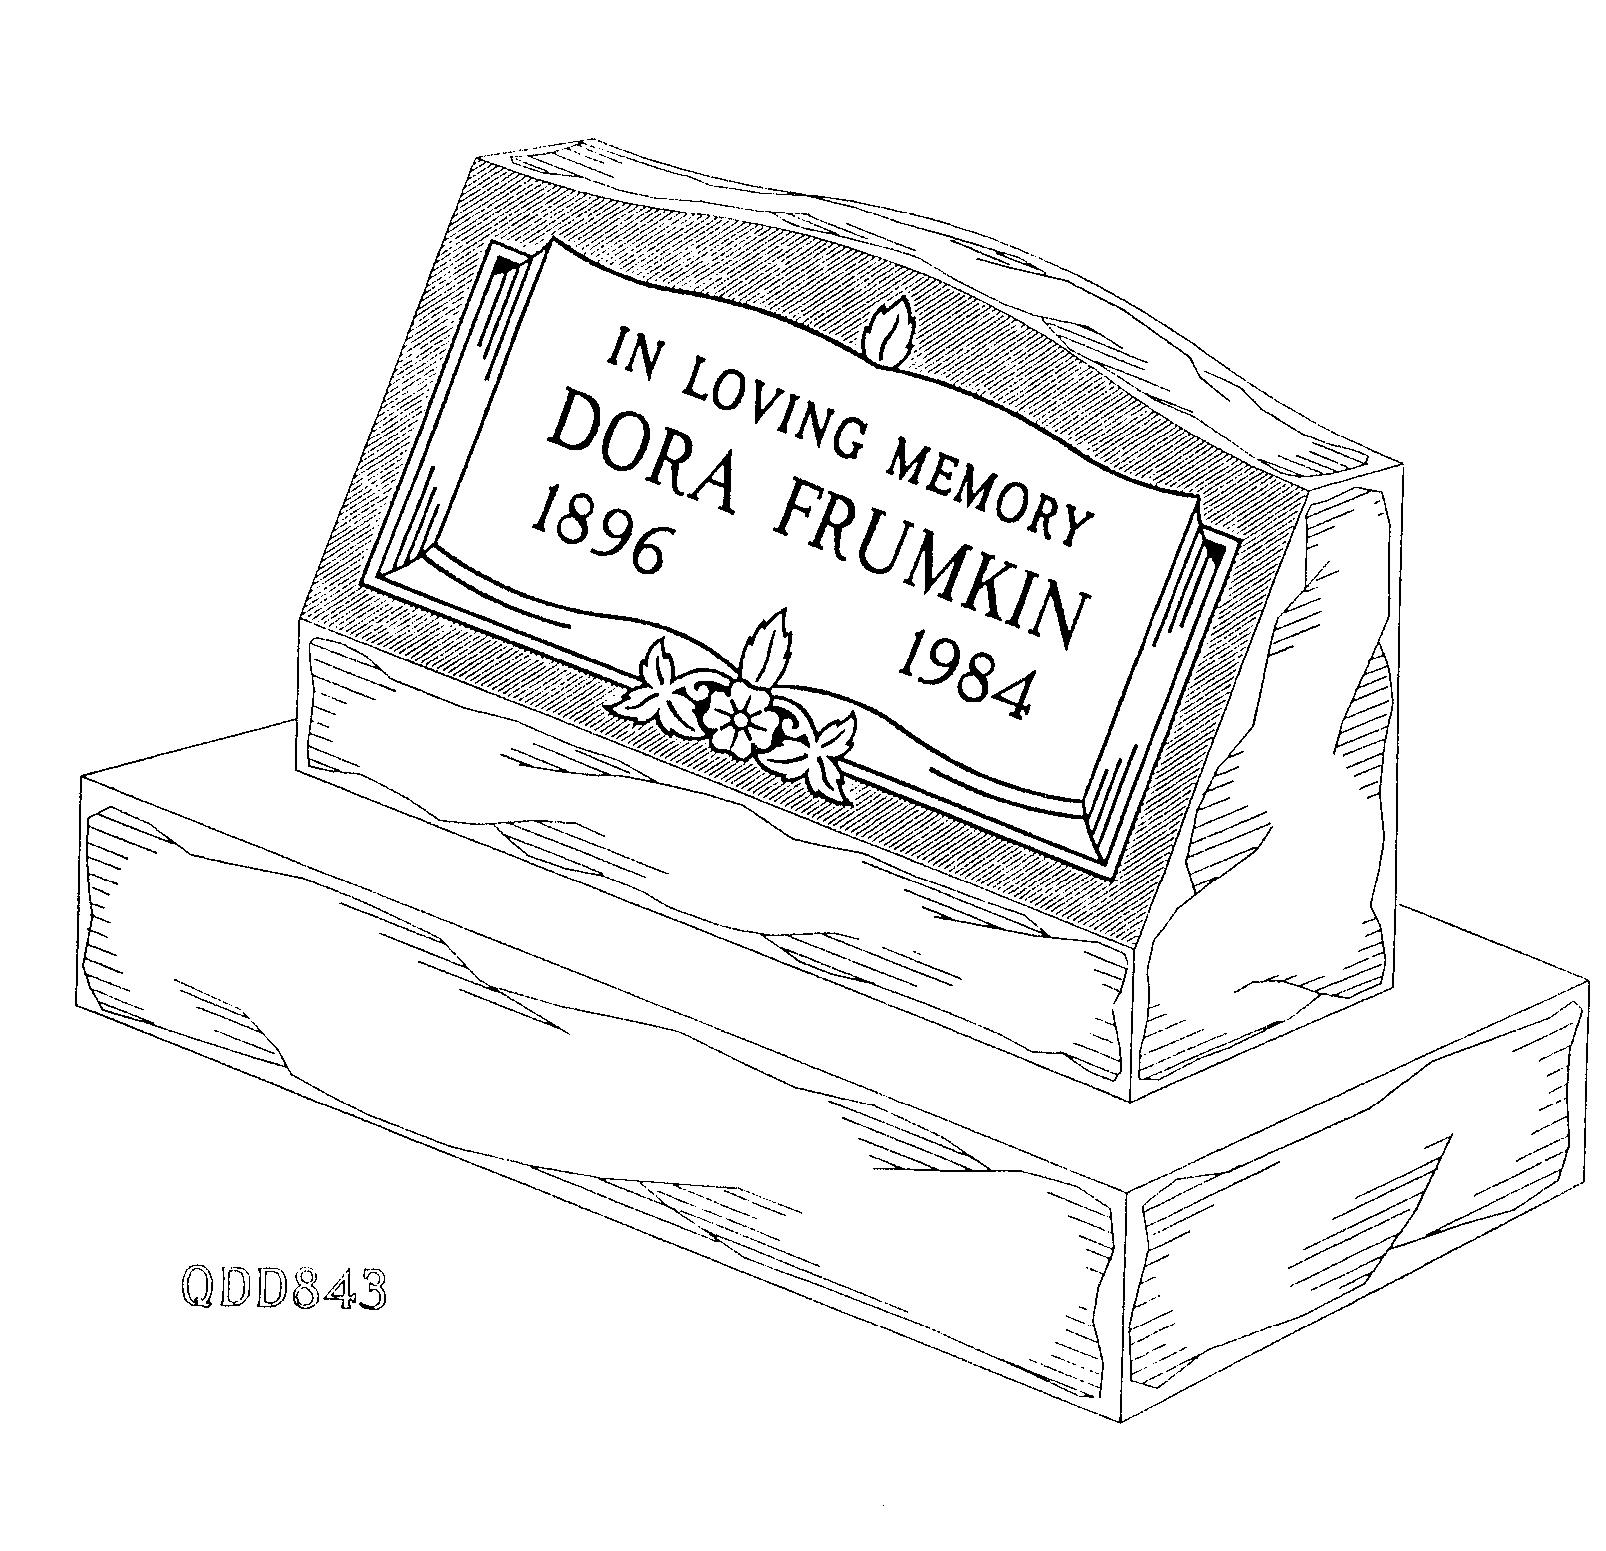 a black and white drawing of a gravestone for dora frumkin